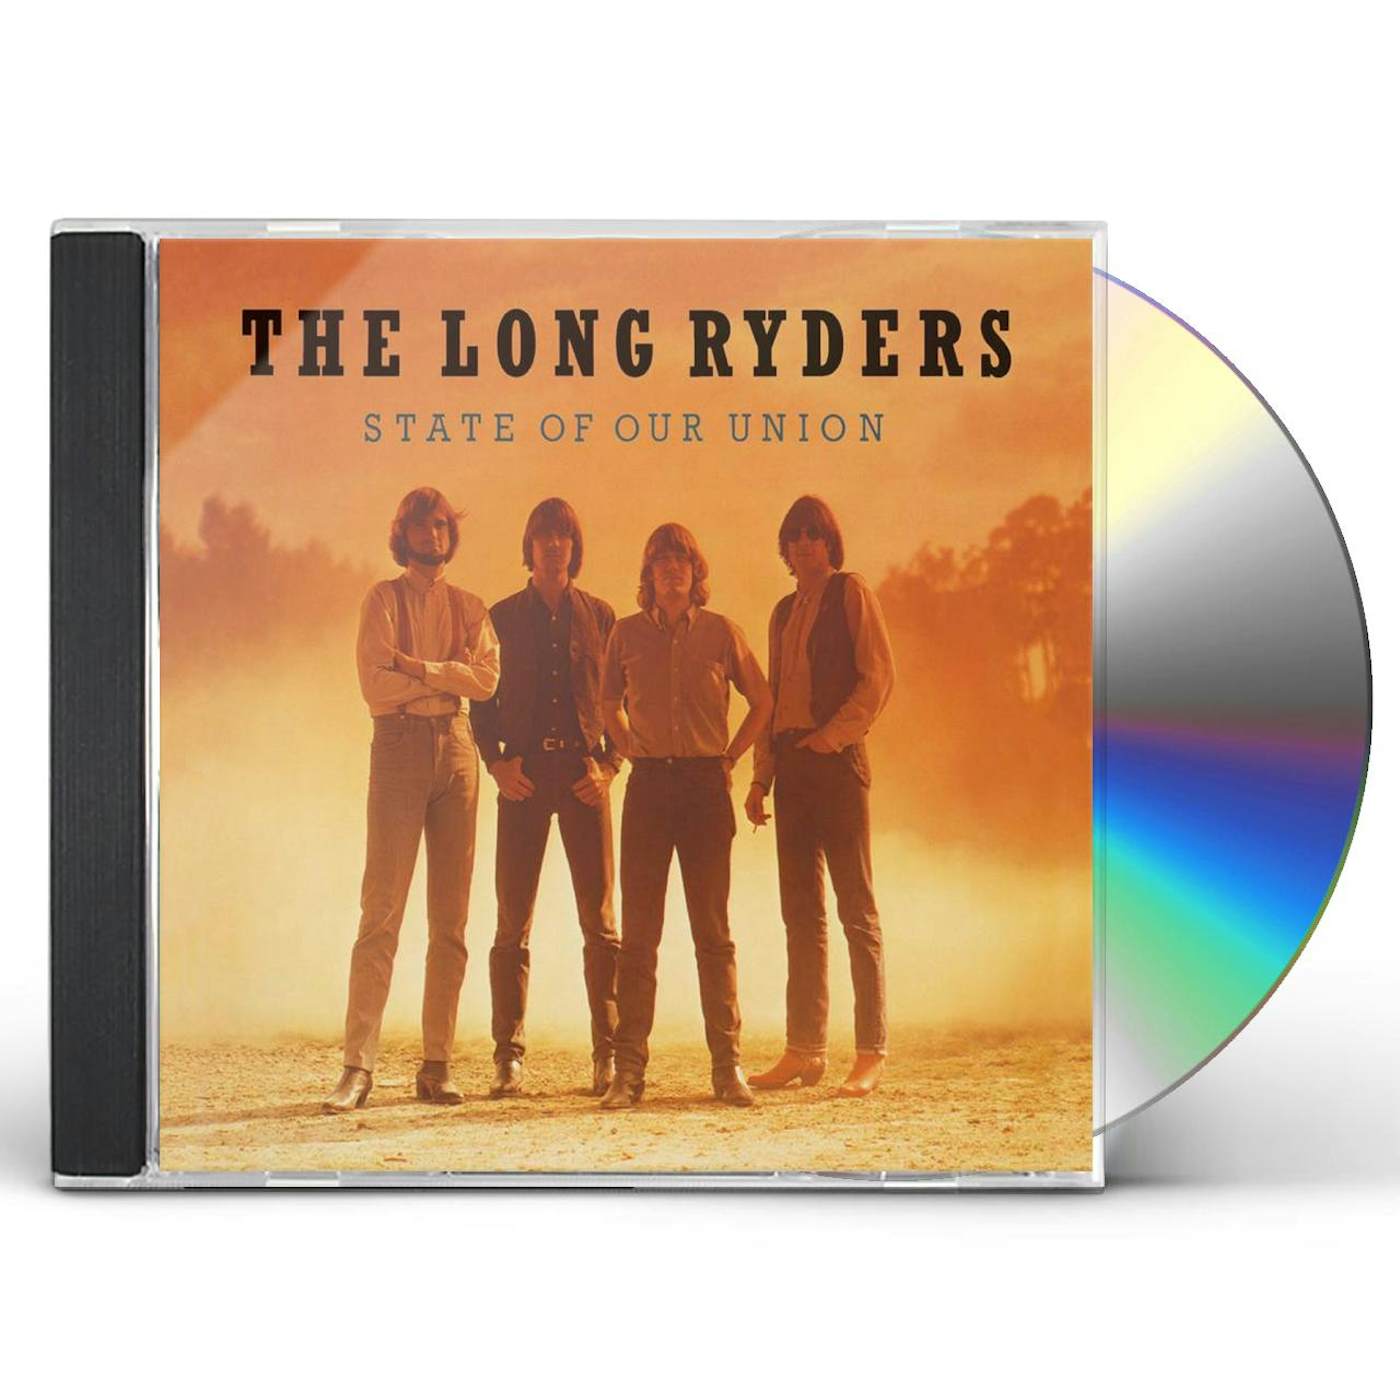 The Long Ryders STATE OF OUR UNION CD